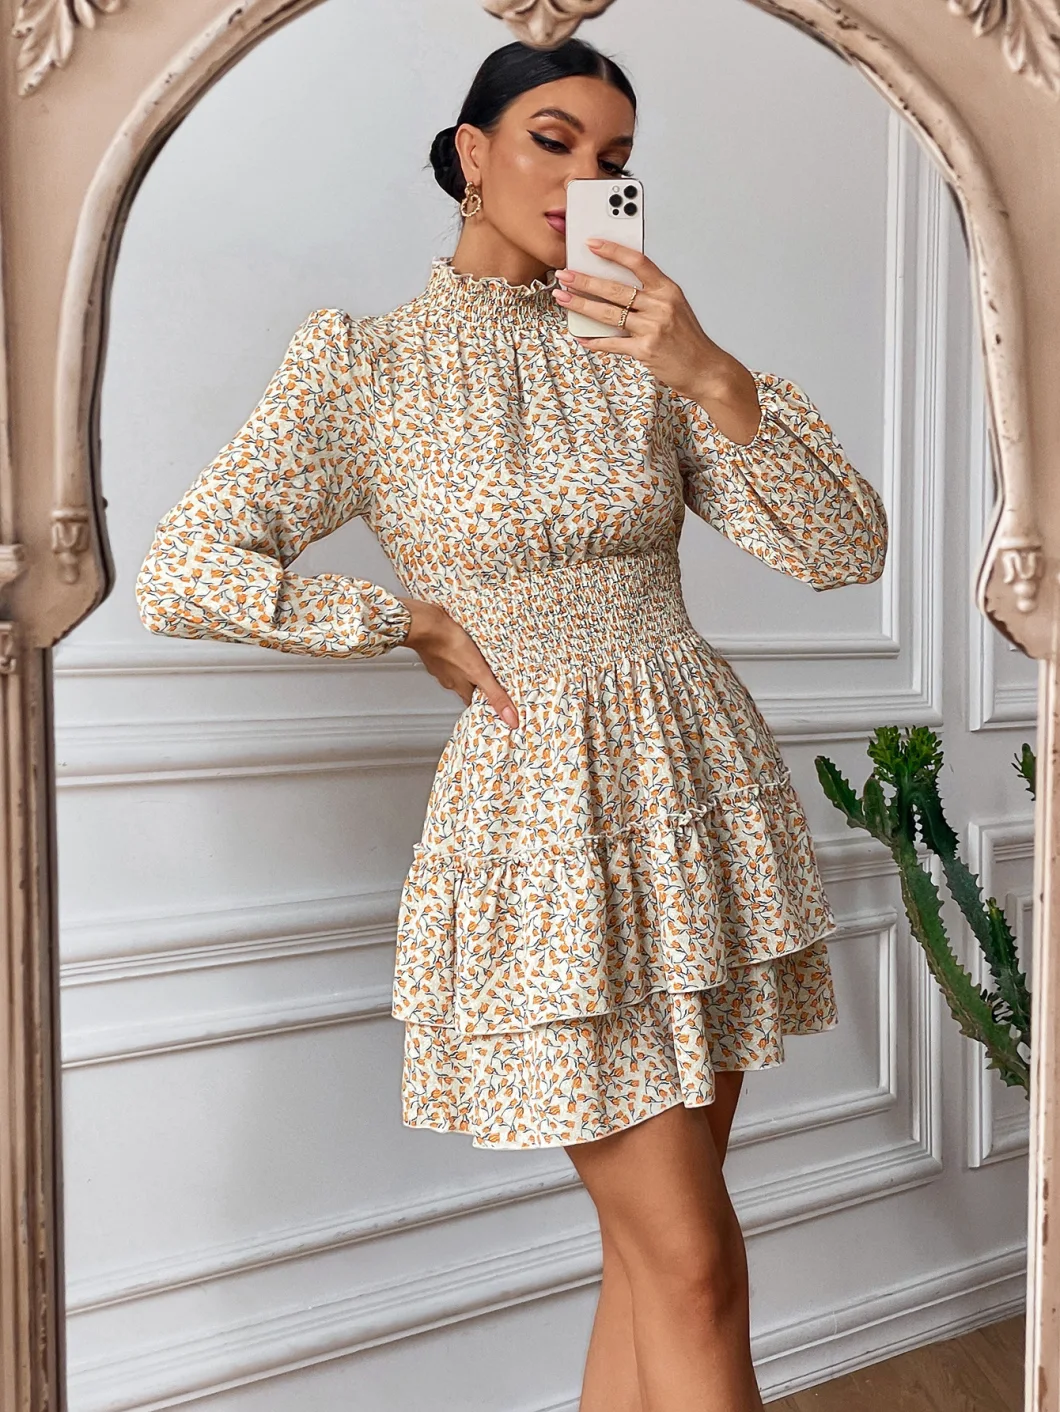 Independent Research and Development Design Noble Temperament Floral Dress Spring and Autumn Four Seasons Cake Skirt Women Dresses